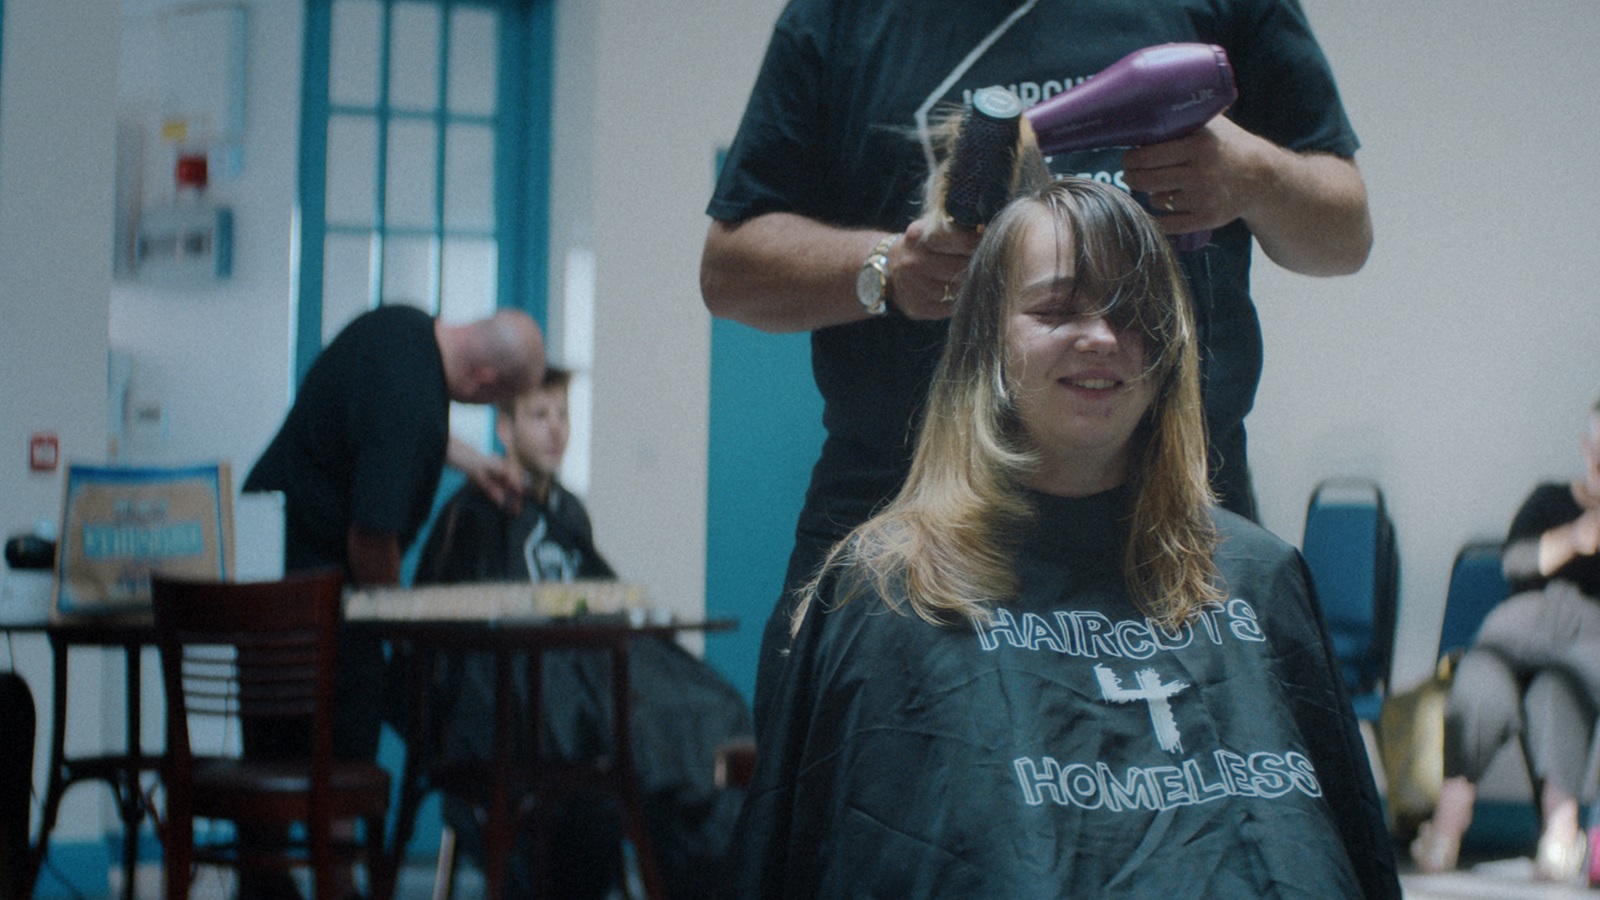 Homeless People Get Pampered with Amazing Haircuts